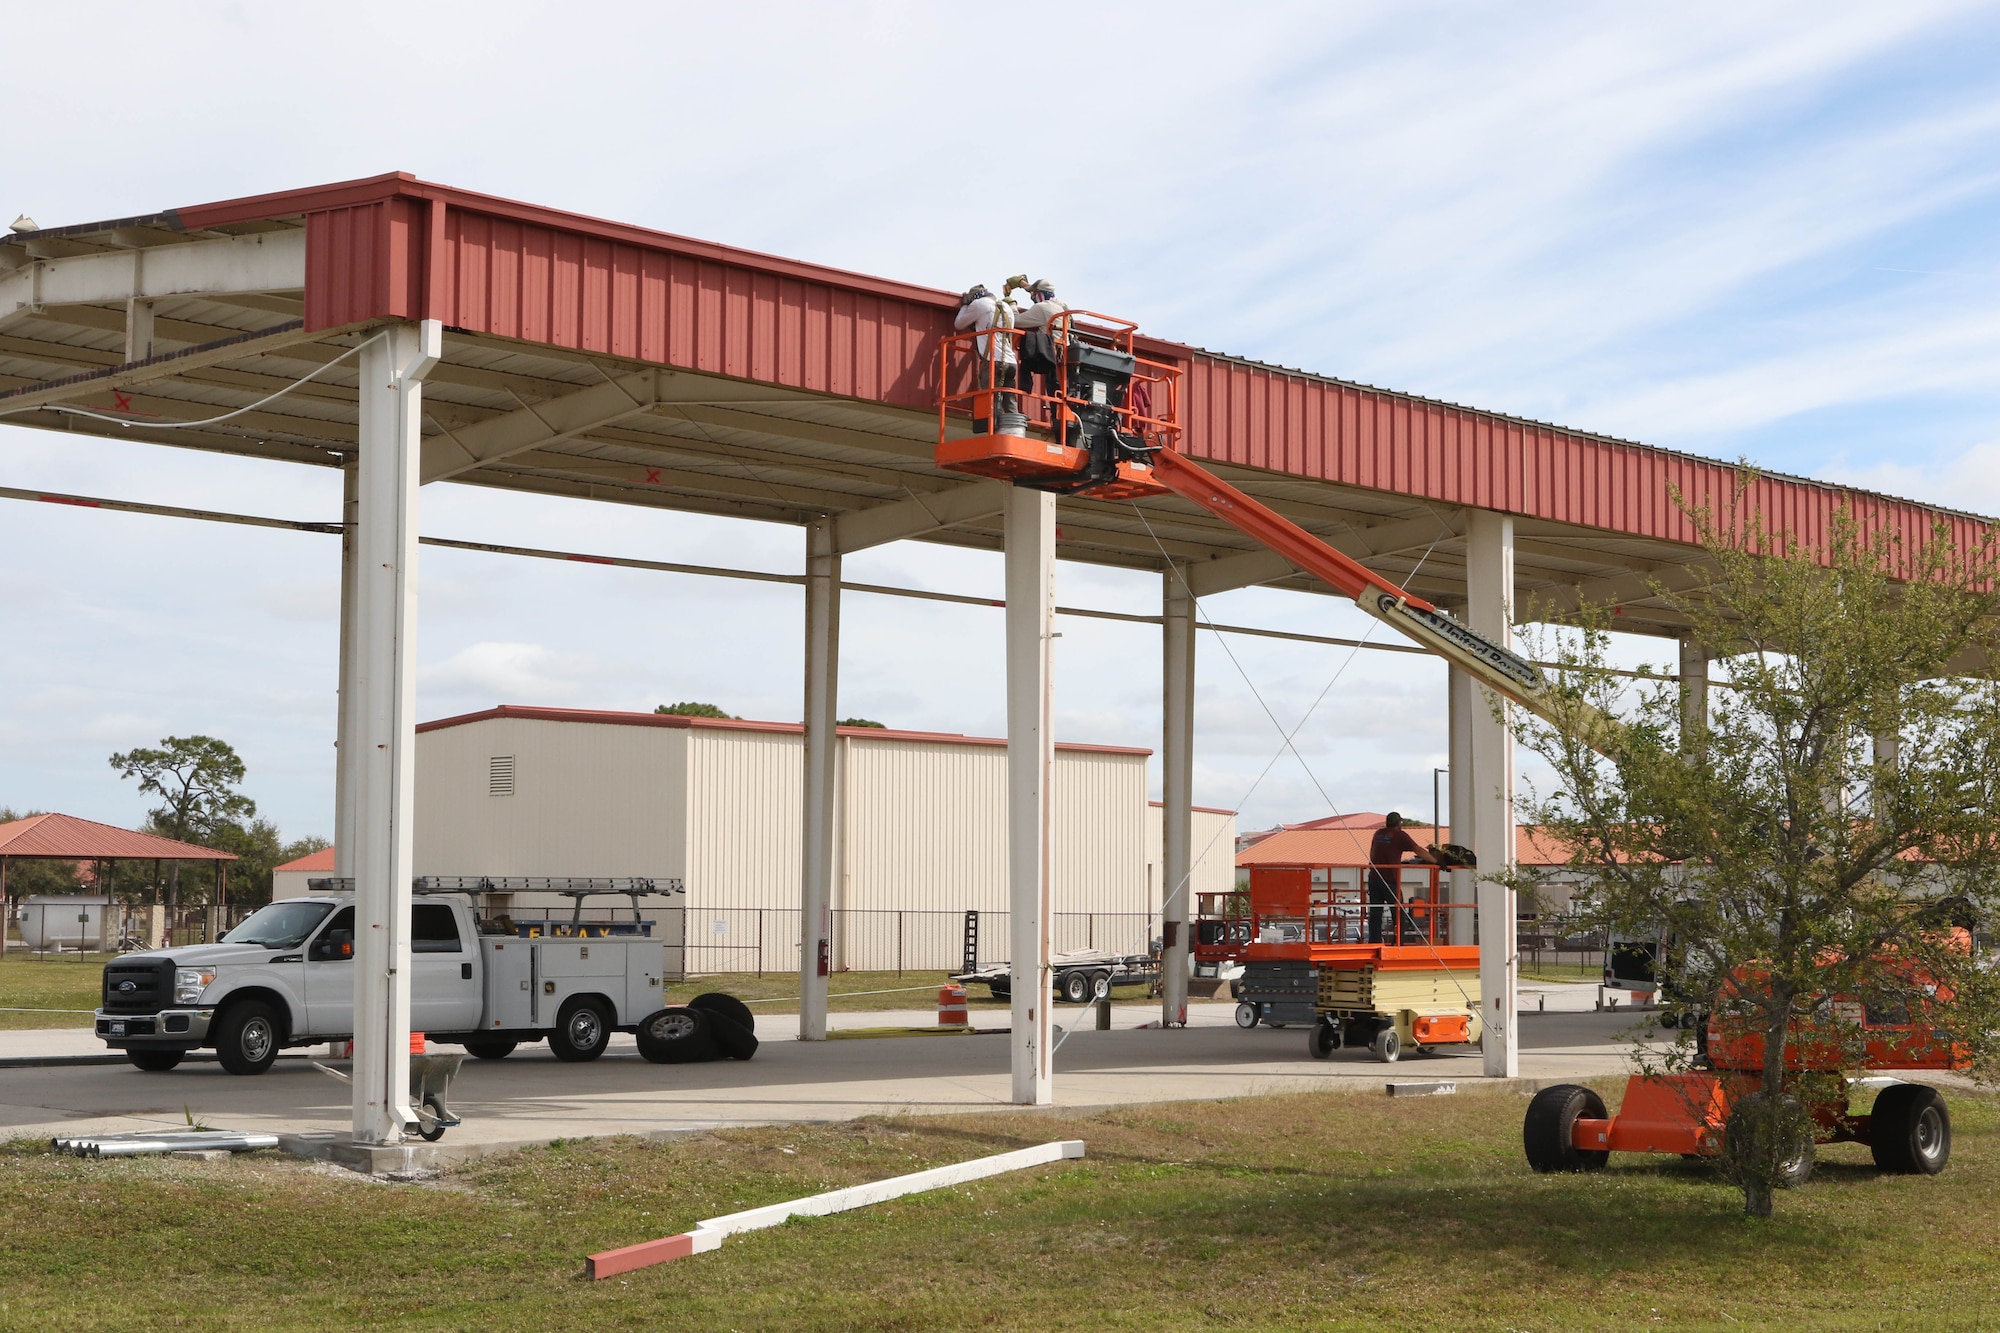 Construction workers began tear down procedures of the existing base supply and equipment shed, March 6, 2020,